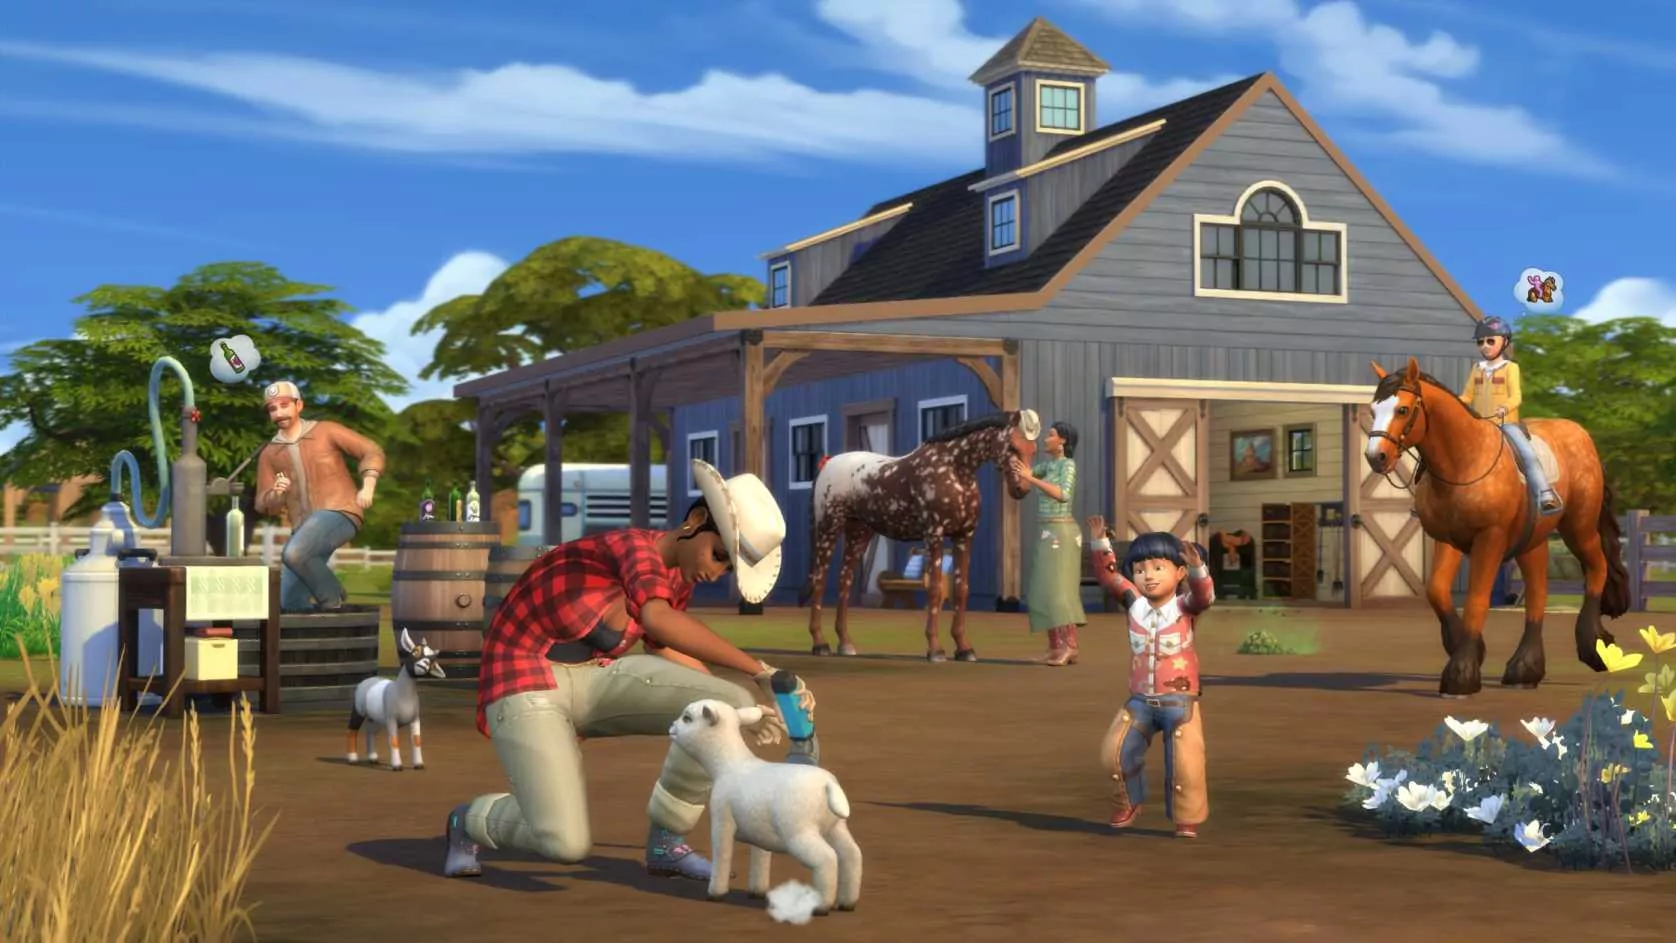 The Sims 4 Horse Ranch Expansion Pack - The Sim Architect